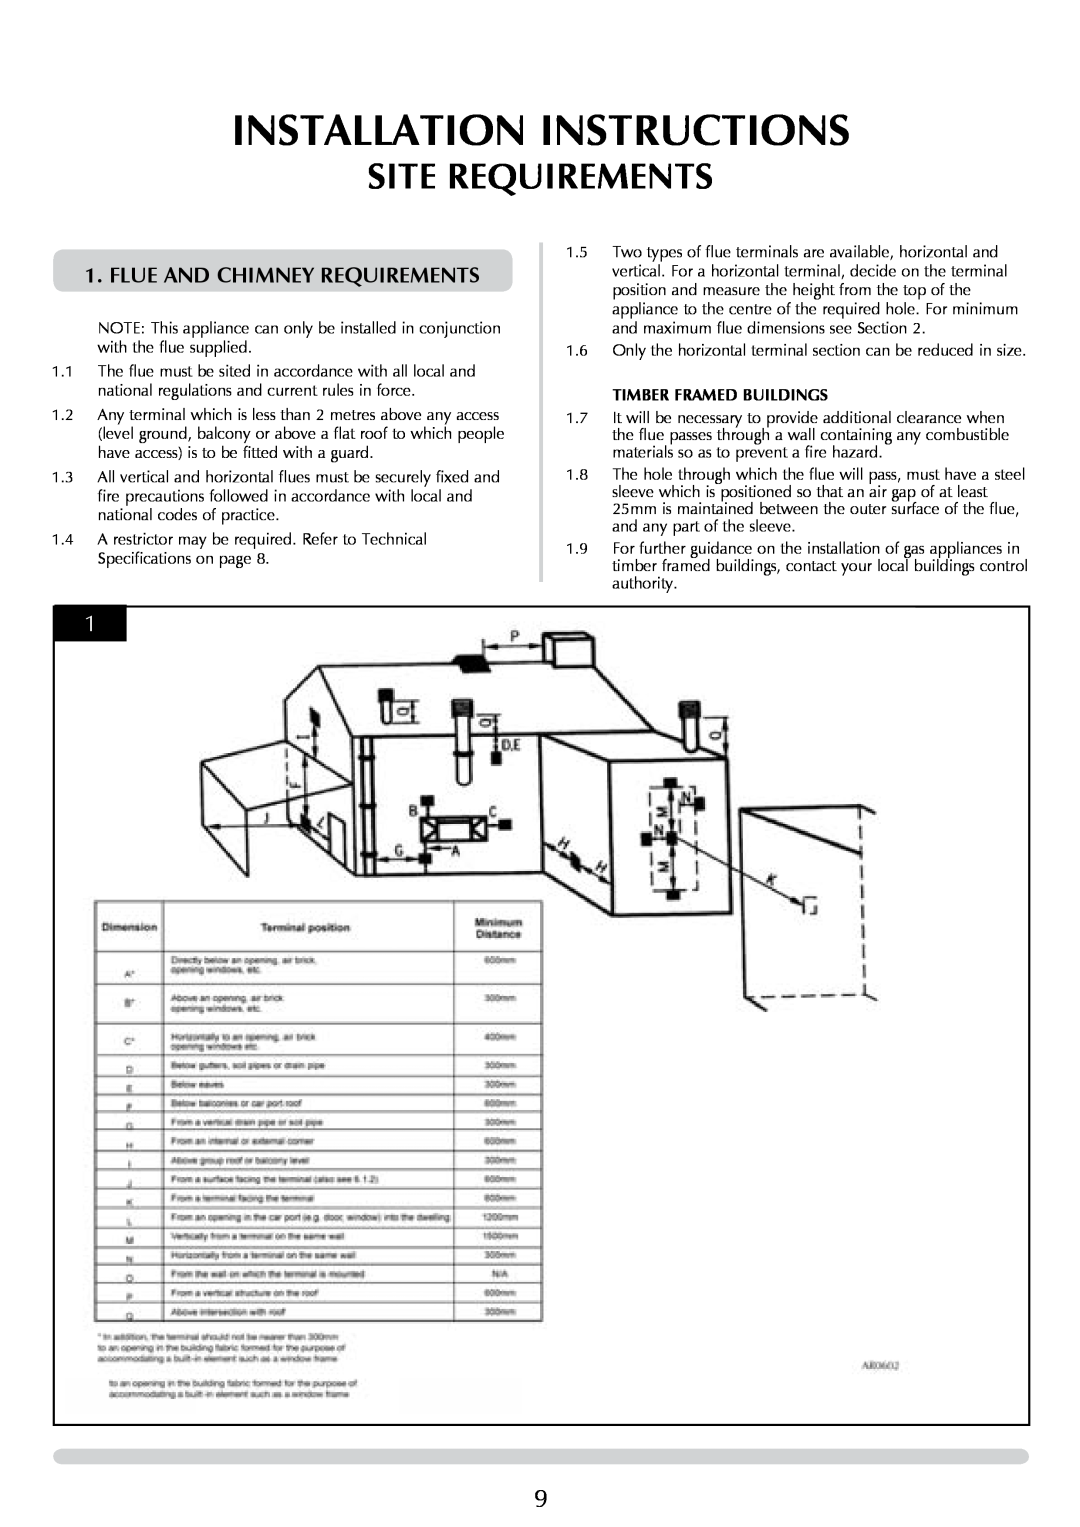 Stovax P8627 BS, P8627 MA manual Site Requirements, Installation Instructions, Flue and Chimney Requirements 